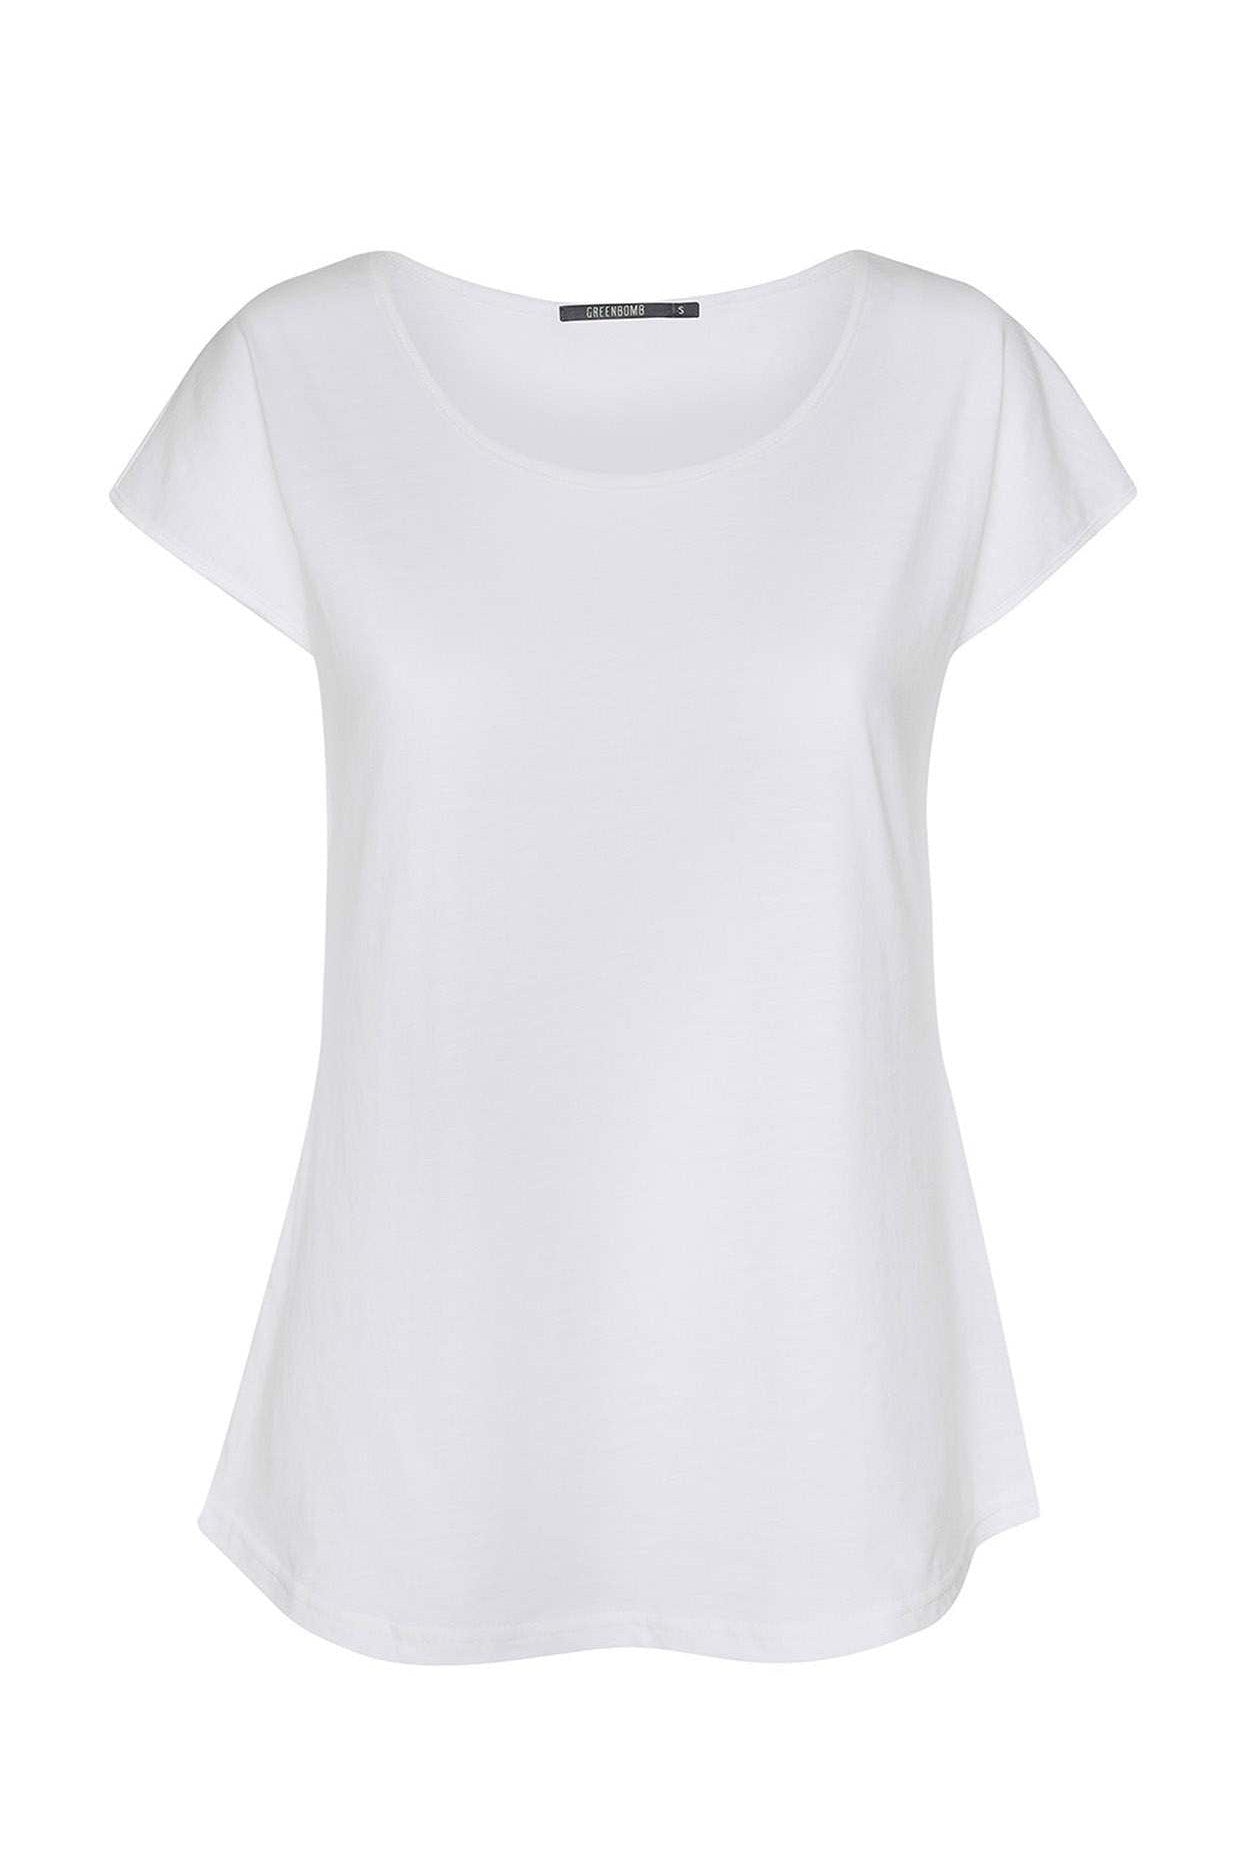 Greenbomb Basic Cool GOTS Tee - White-Womens-Ohh! By Gum - Shop Sustainable